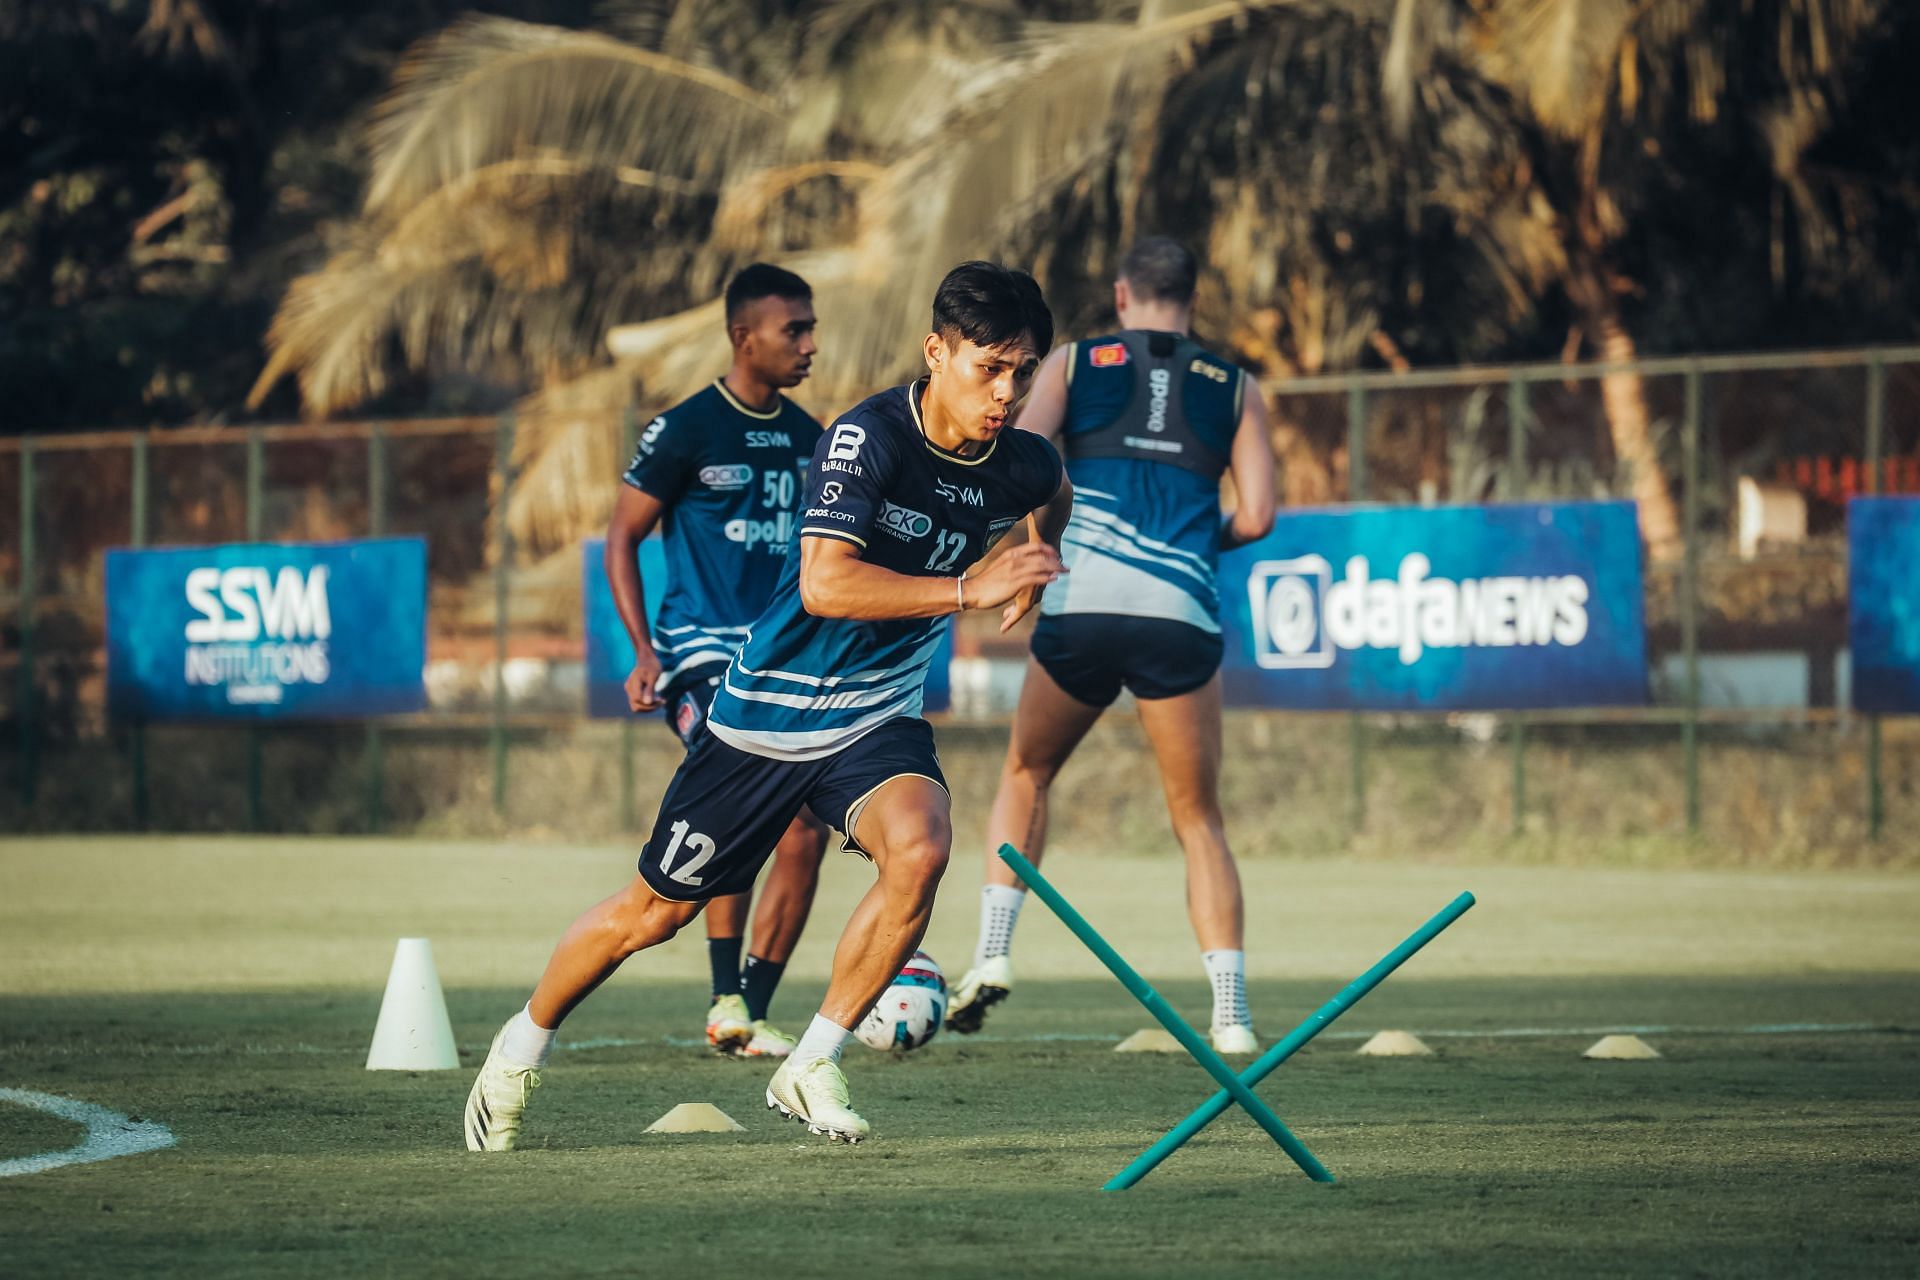 Ninthoi Meetei in action during a training session (Pic credits: Chennaiyin FC Media)